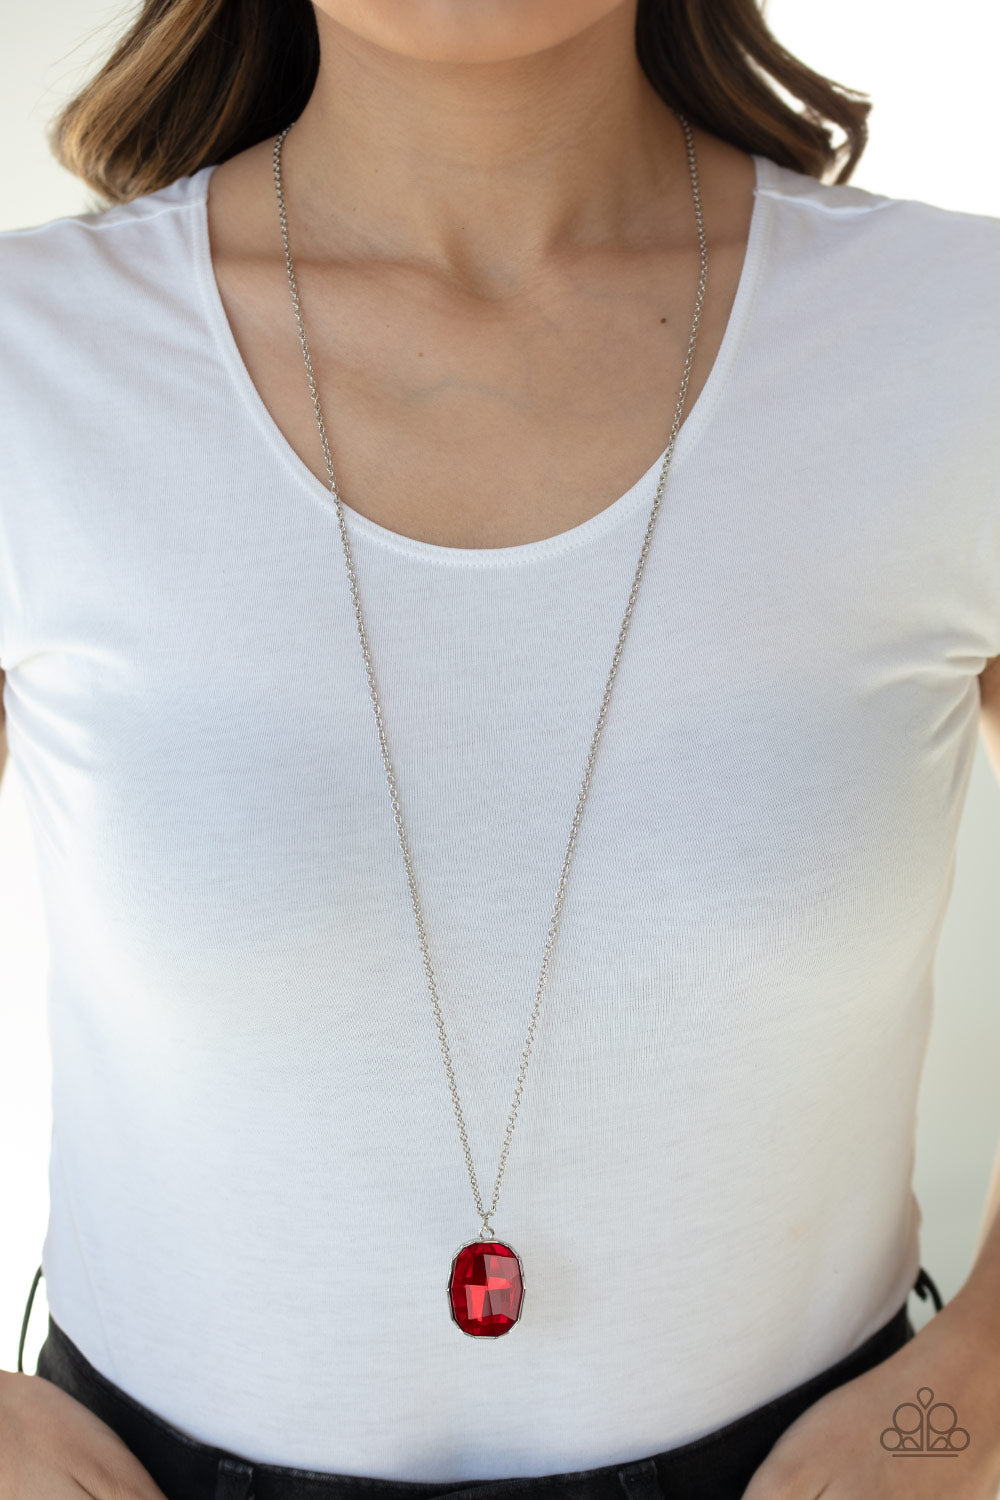 Imperfect Iridescence Necklace - Red